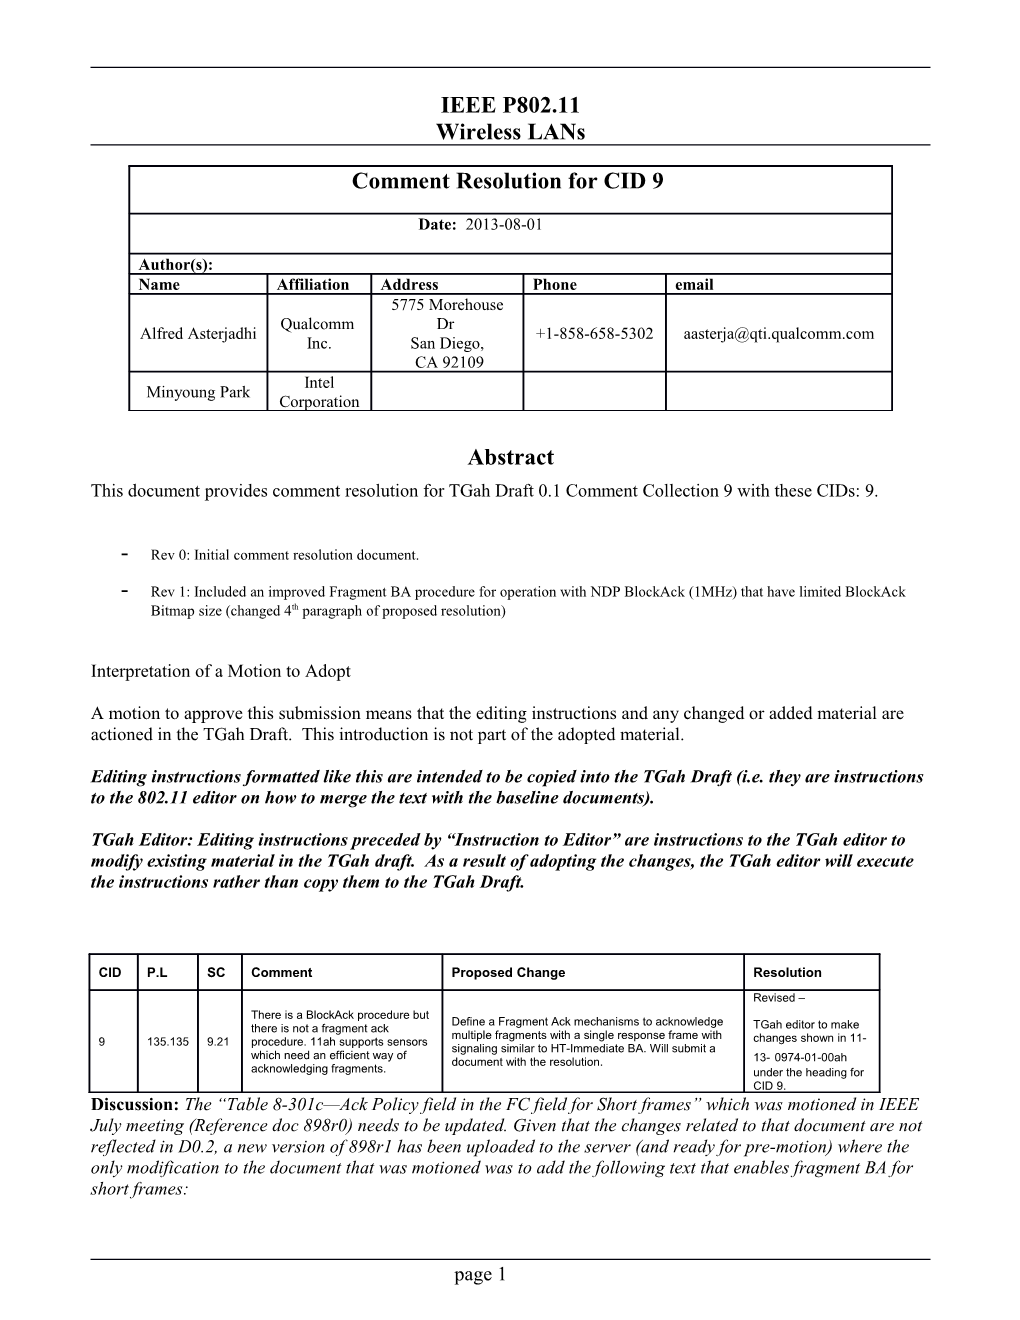 Rev 0: Initial Comment Resolution Document